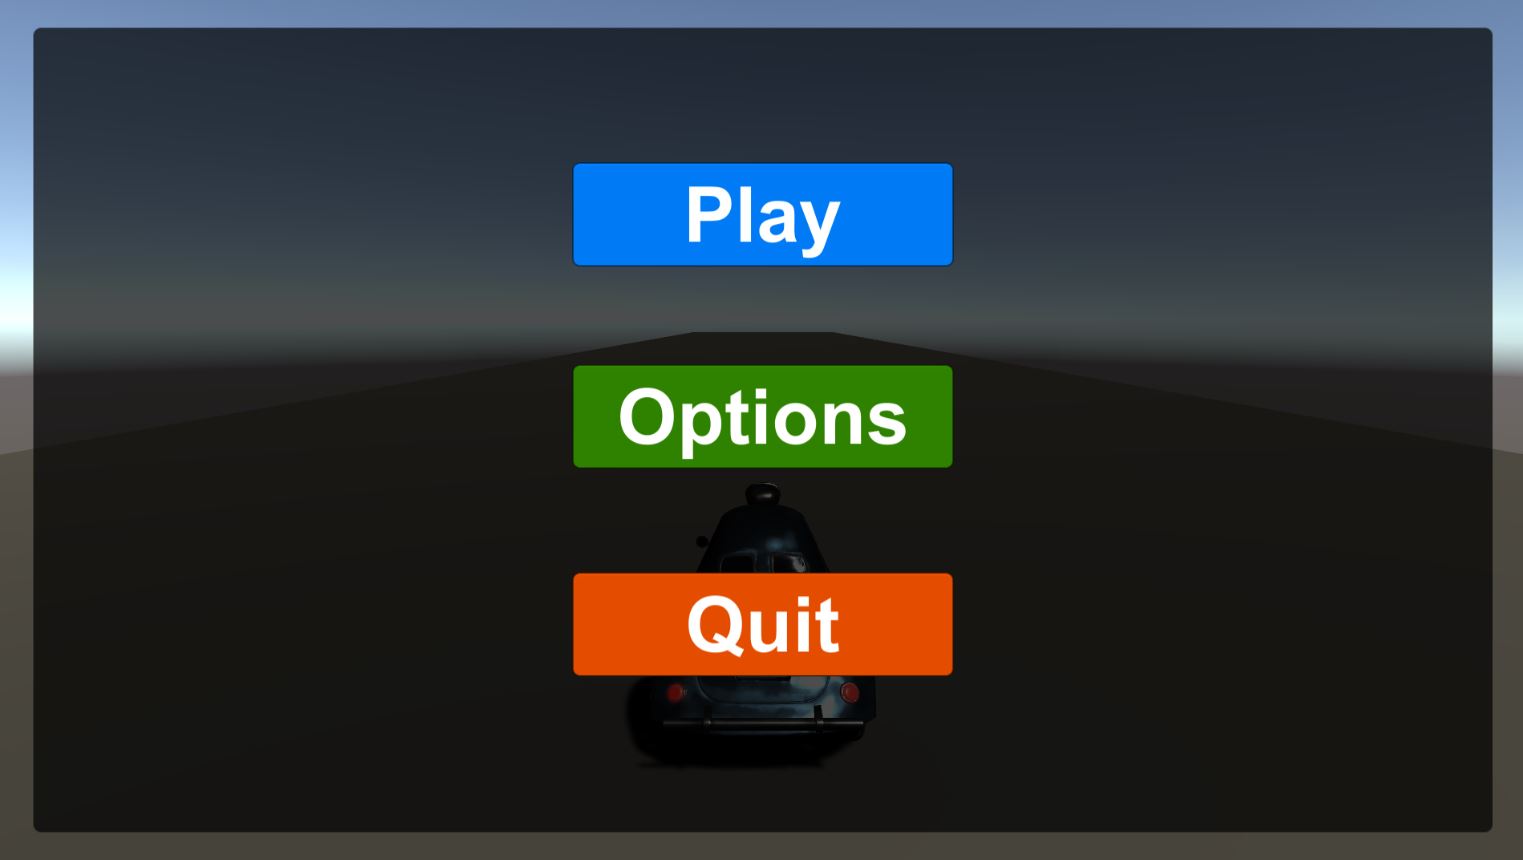 My First Unity Game